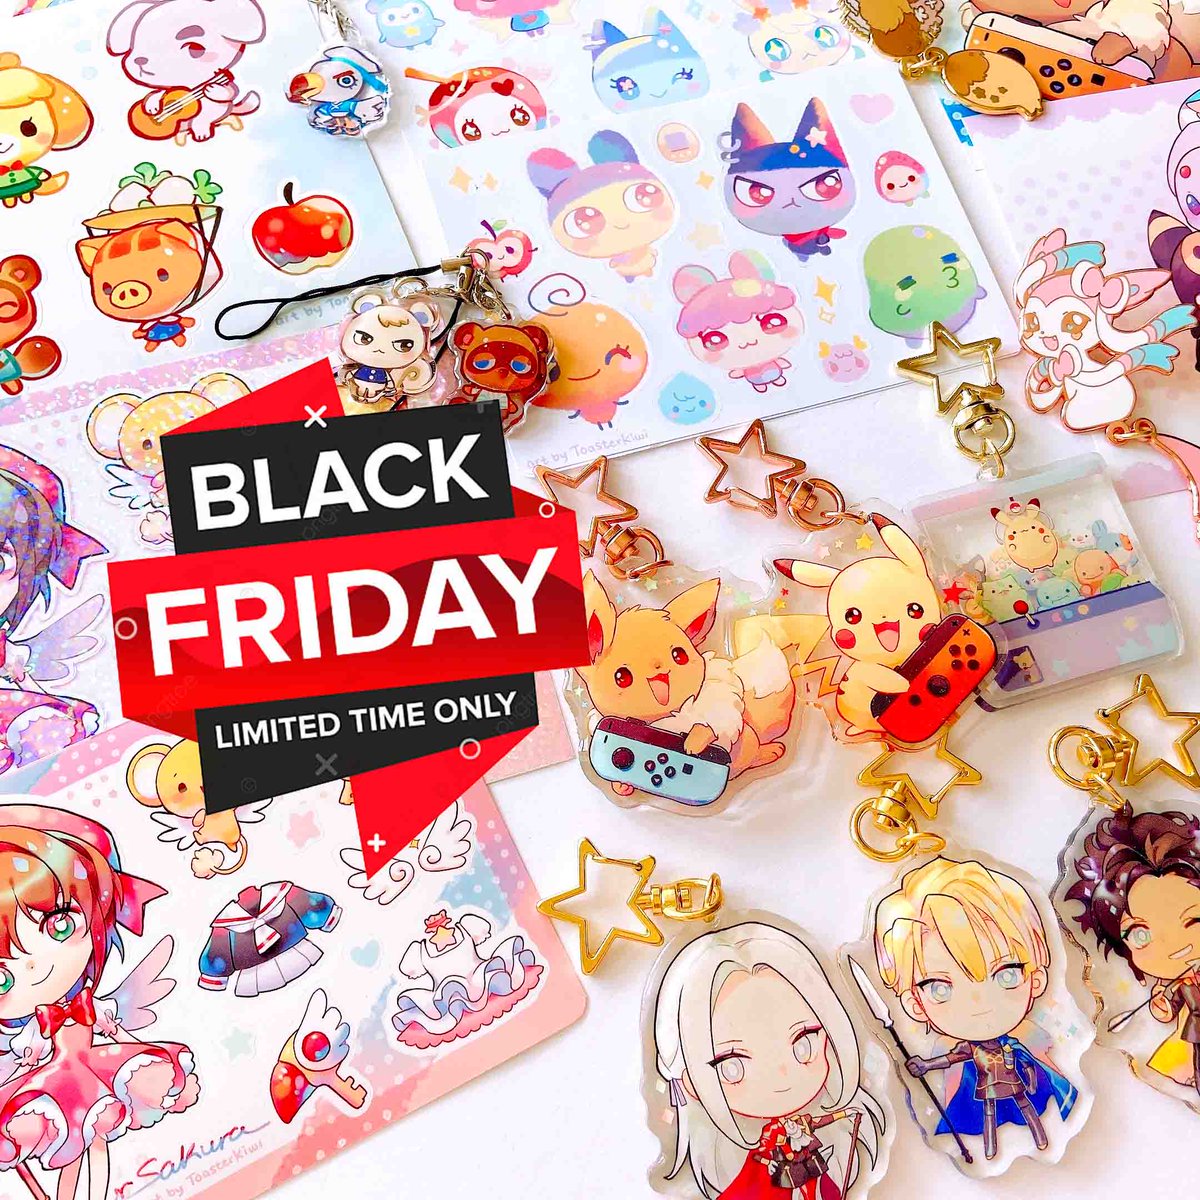 My shop's current promos ❤️?
Mystery bags are temporarily increased to 200% value, and you can get FREE SHIPPING with code "holiday2020"
https://t.co/8DUOHiDUh6 